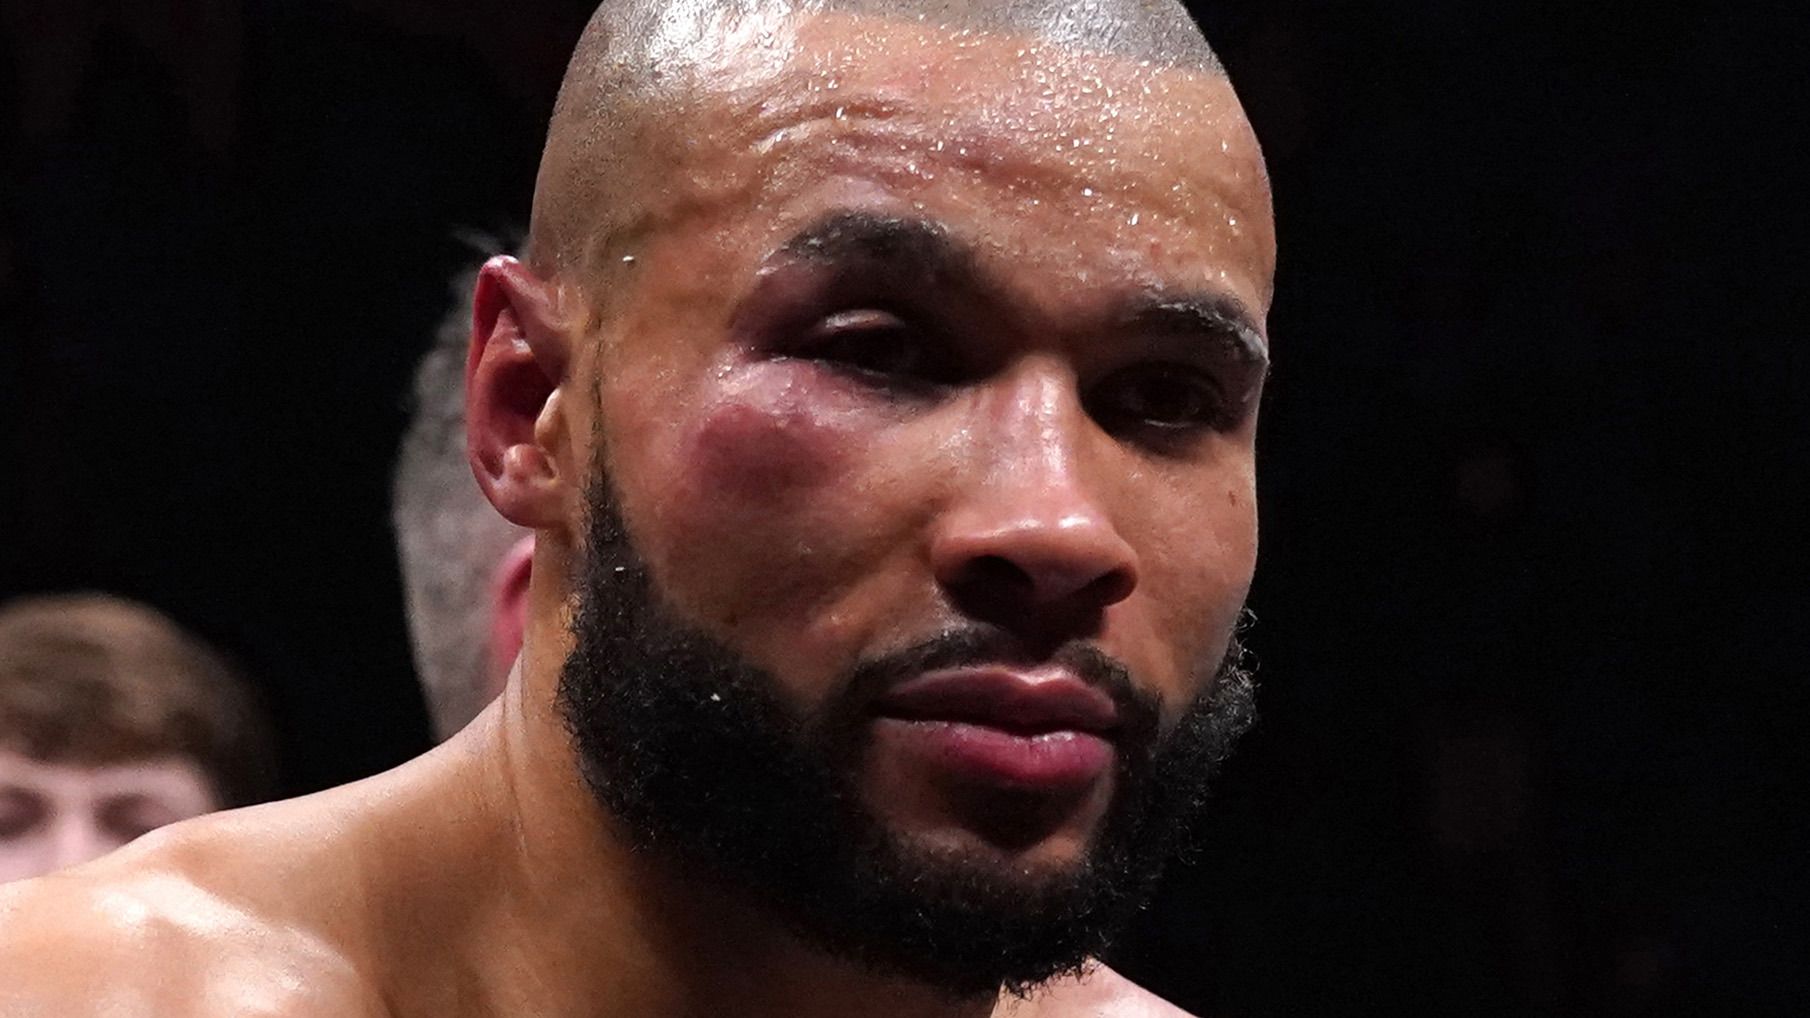 'Out of nowhere': British boxing star Chris Eubank Jr's five-year streak ended by brutal Liam Smith KO